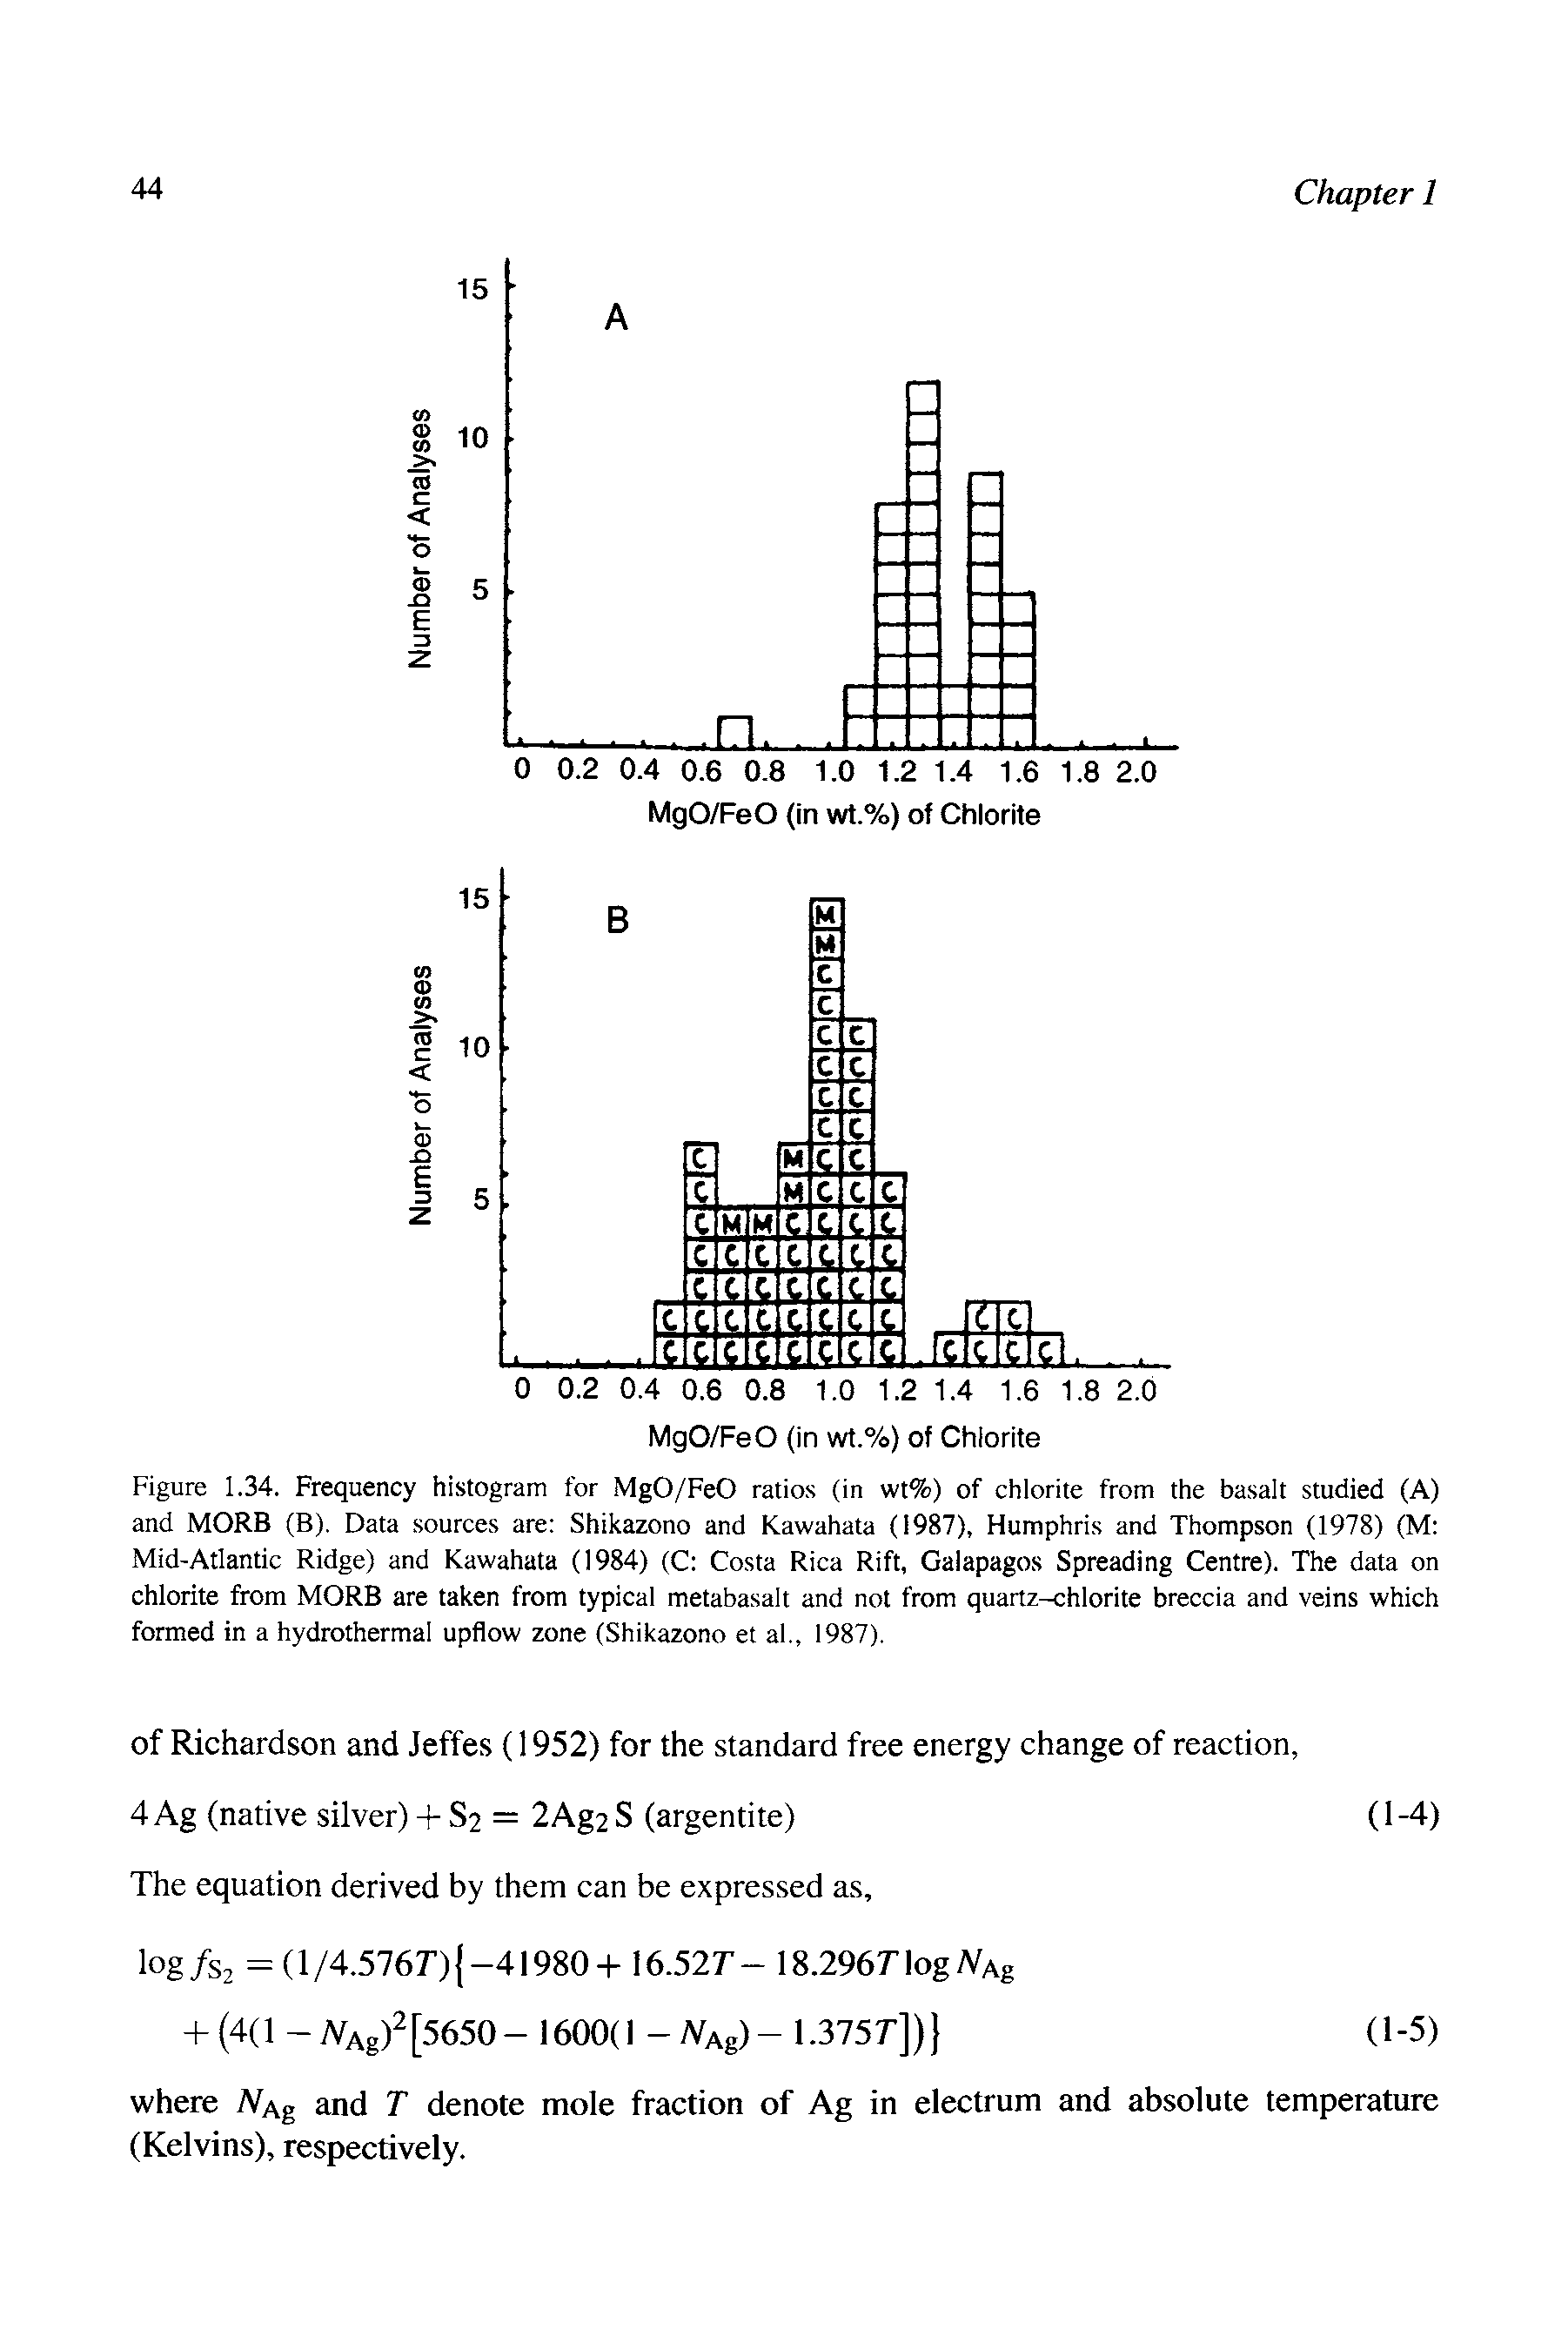 Figure 1.34. Frequency histogram for MgO/FeO ratios (in wt%) of chlorite from the basalt studied (A) and MORE (B). Data sources are Shikazono and Kawahata (1987), Humphris and Thompson (1978) (M Mid-Atlantic Ridge) and Kawahata (1984) (C Costa Rica Rift, Galapagos Spreading Centre). The data on chlorite from MORE are taken from typical metabasalt and not from quartz-chlorite breccia and veins which formed in a hydrothermal upflow zone (Shikazono et al., 1987).